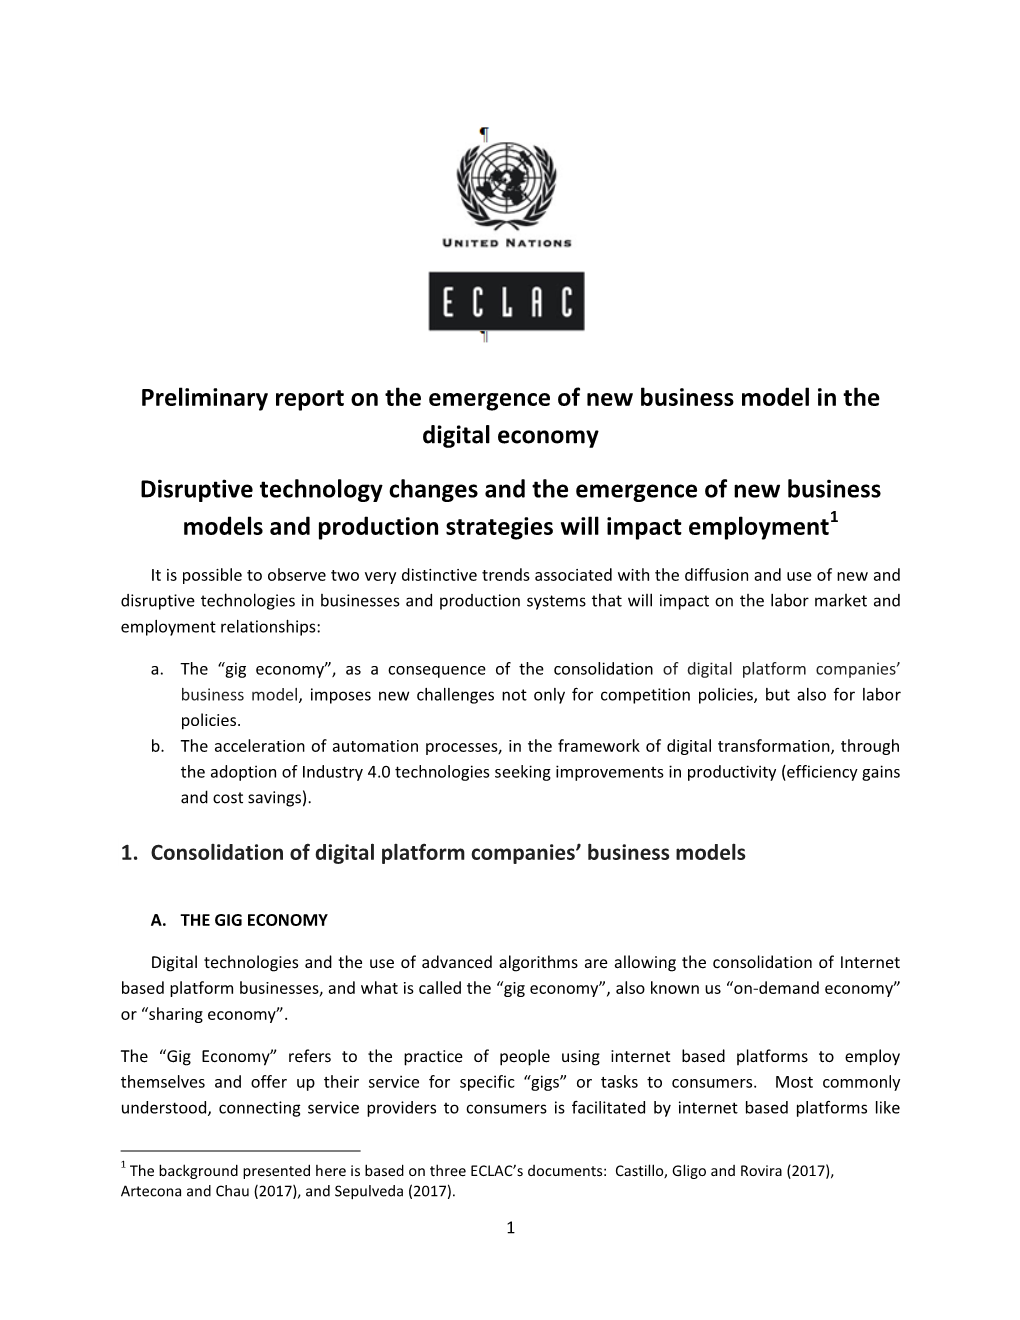 Preliminary Report on the Emergence of New Business Model in the Digital Economy